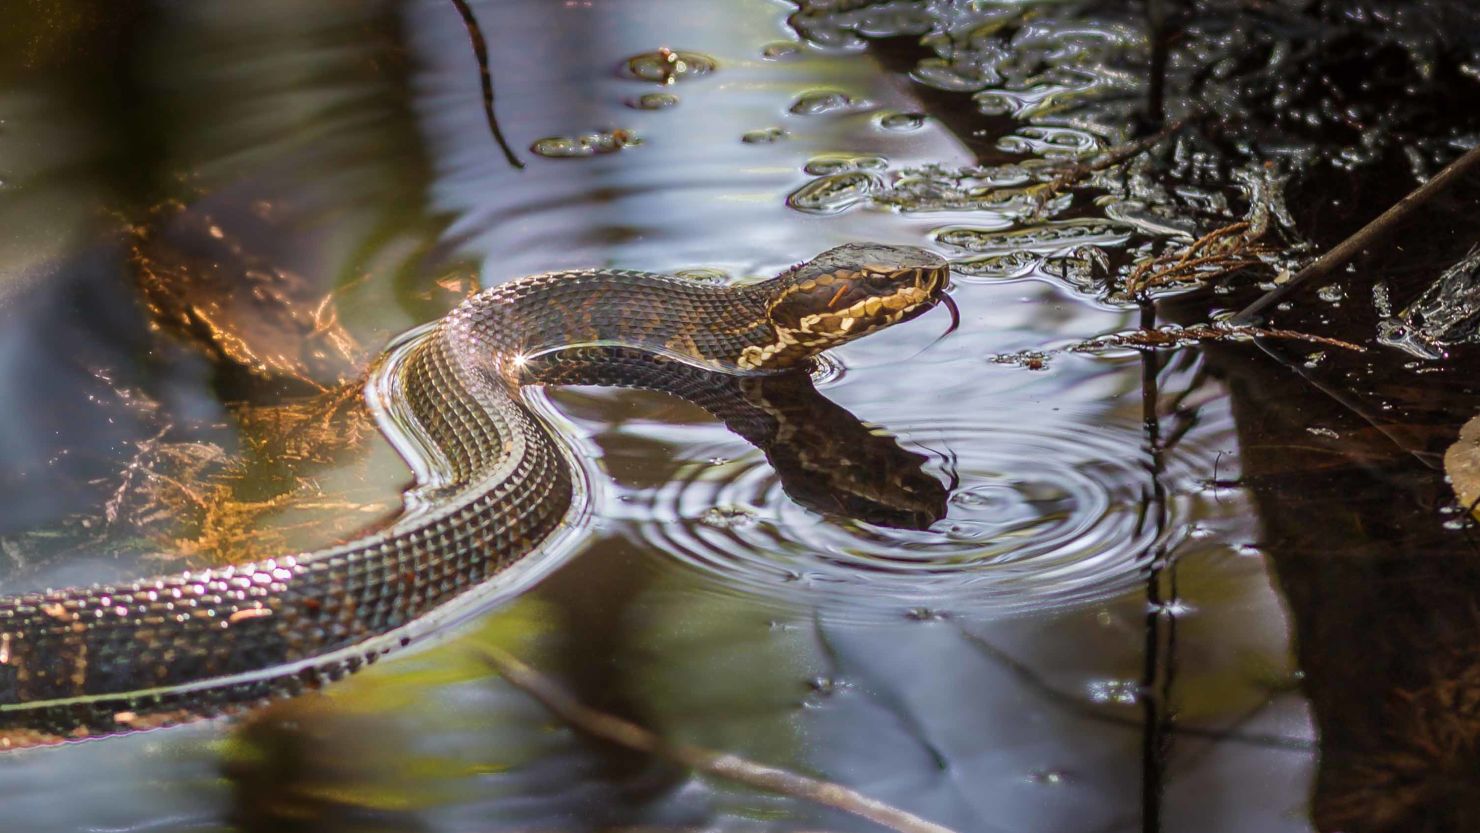 Flooding can increase run-ins with snakes, rats and other critters. Here's  what to do if you encounter them